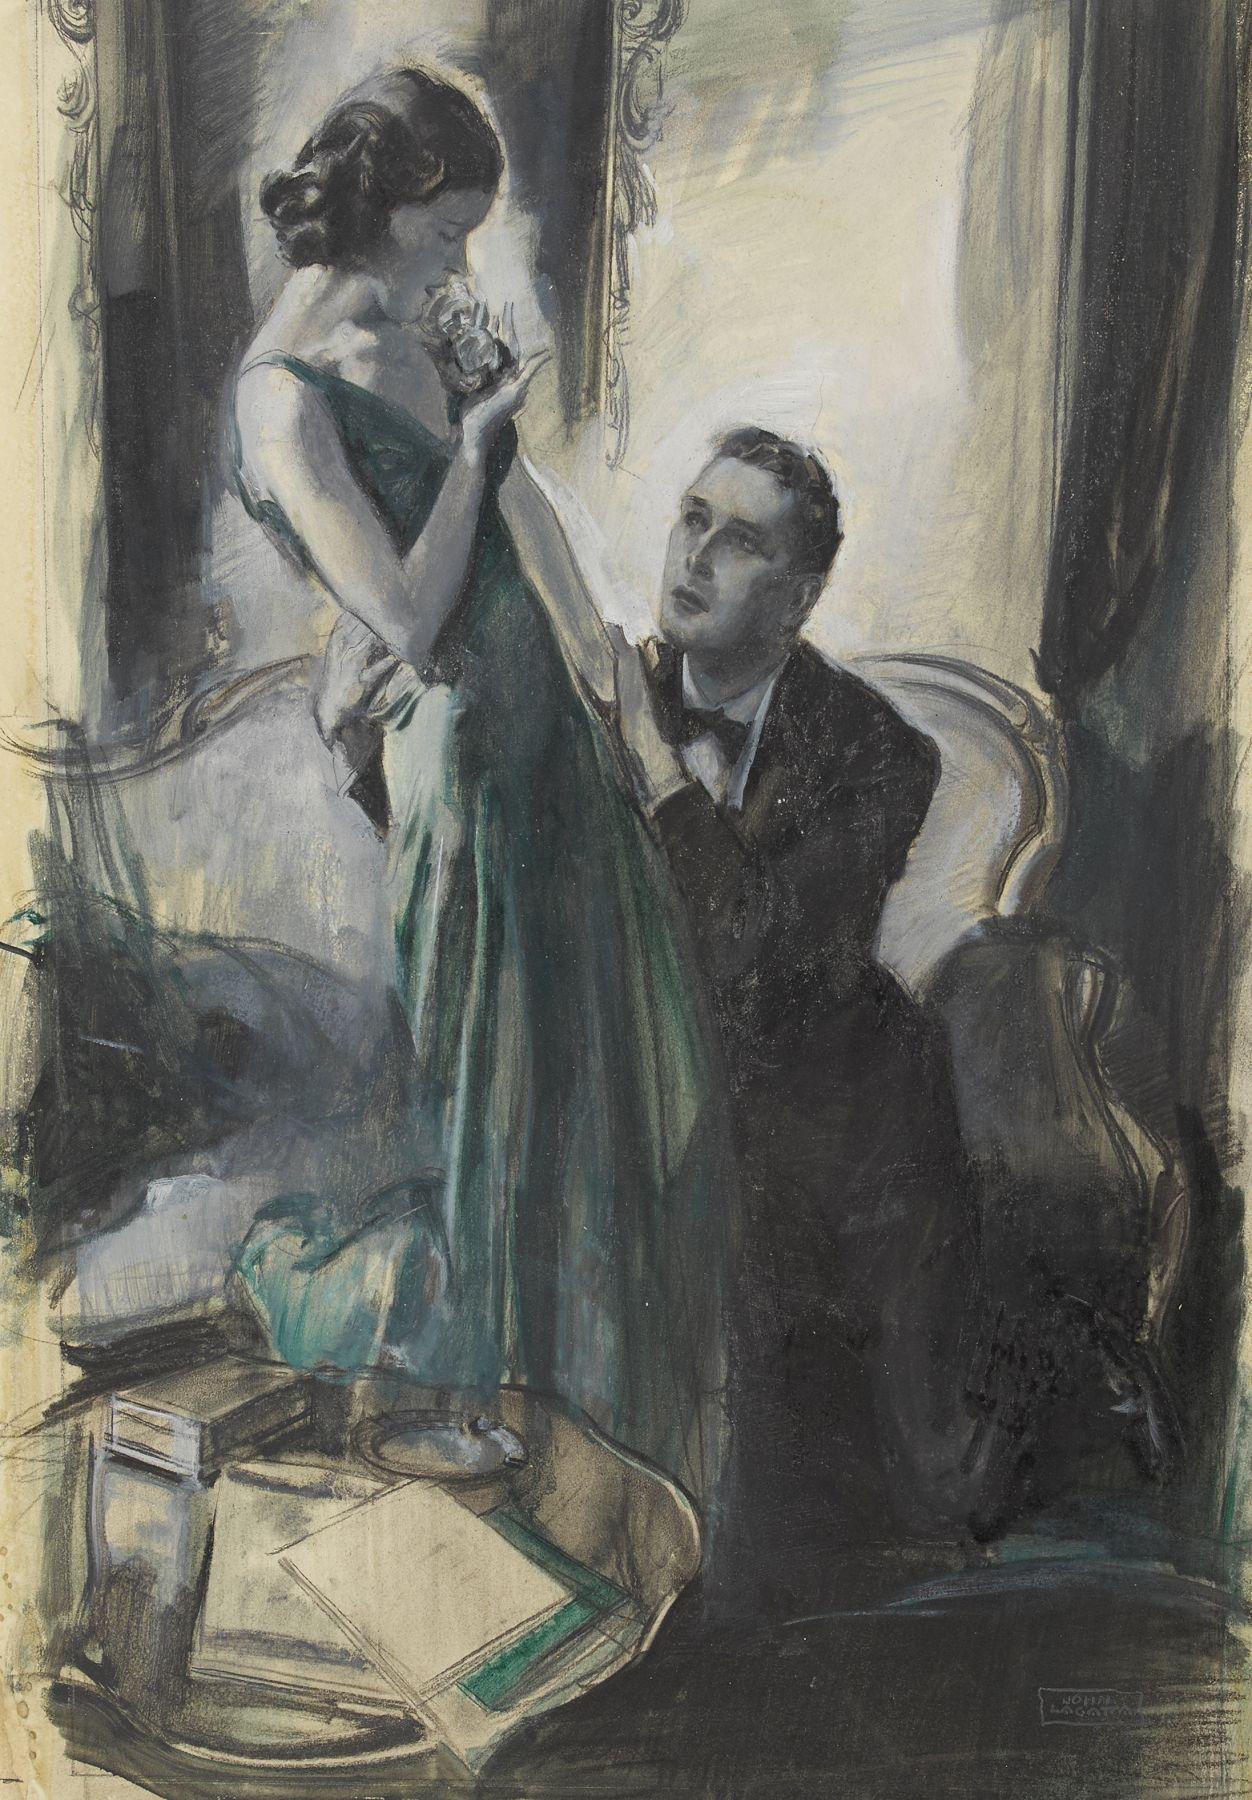 John Lagatta Figurative Art - A Woman in a Green Dress with a Man on His Knees Clutching Her